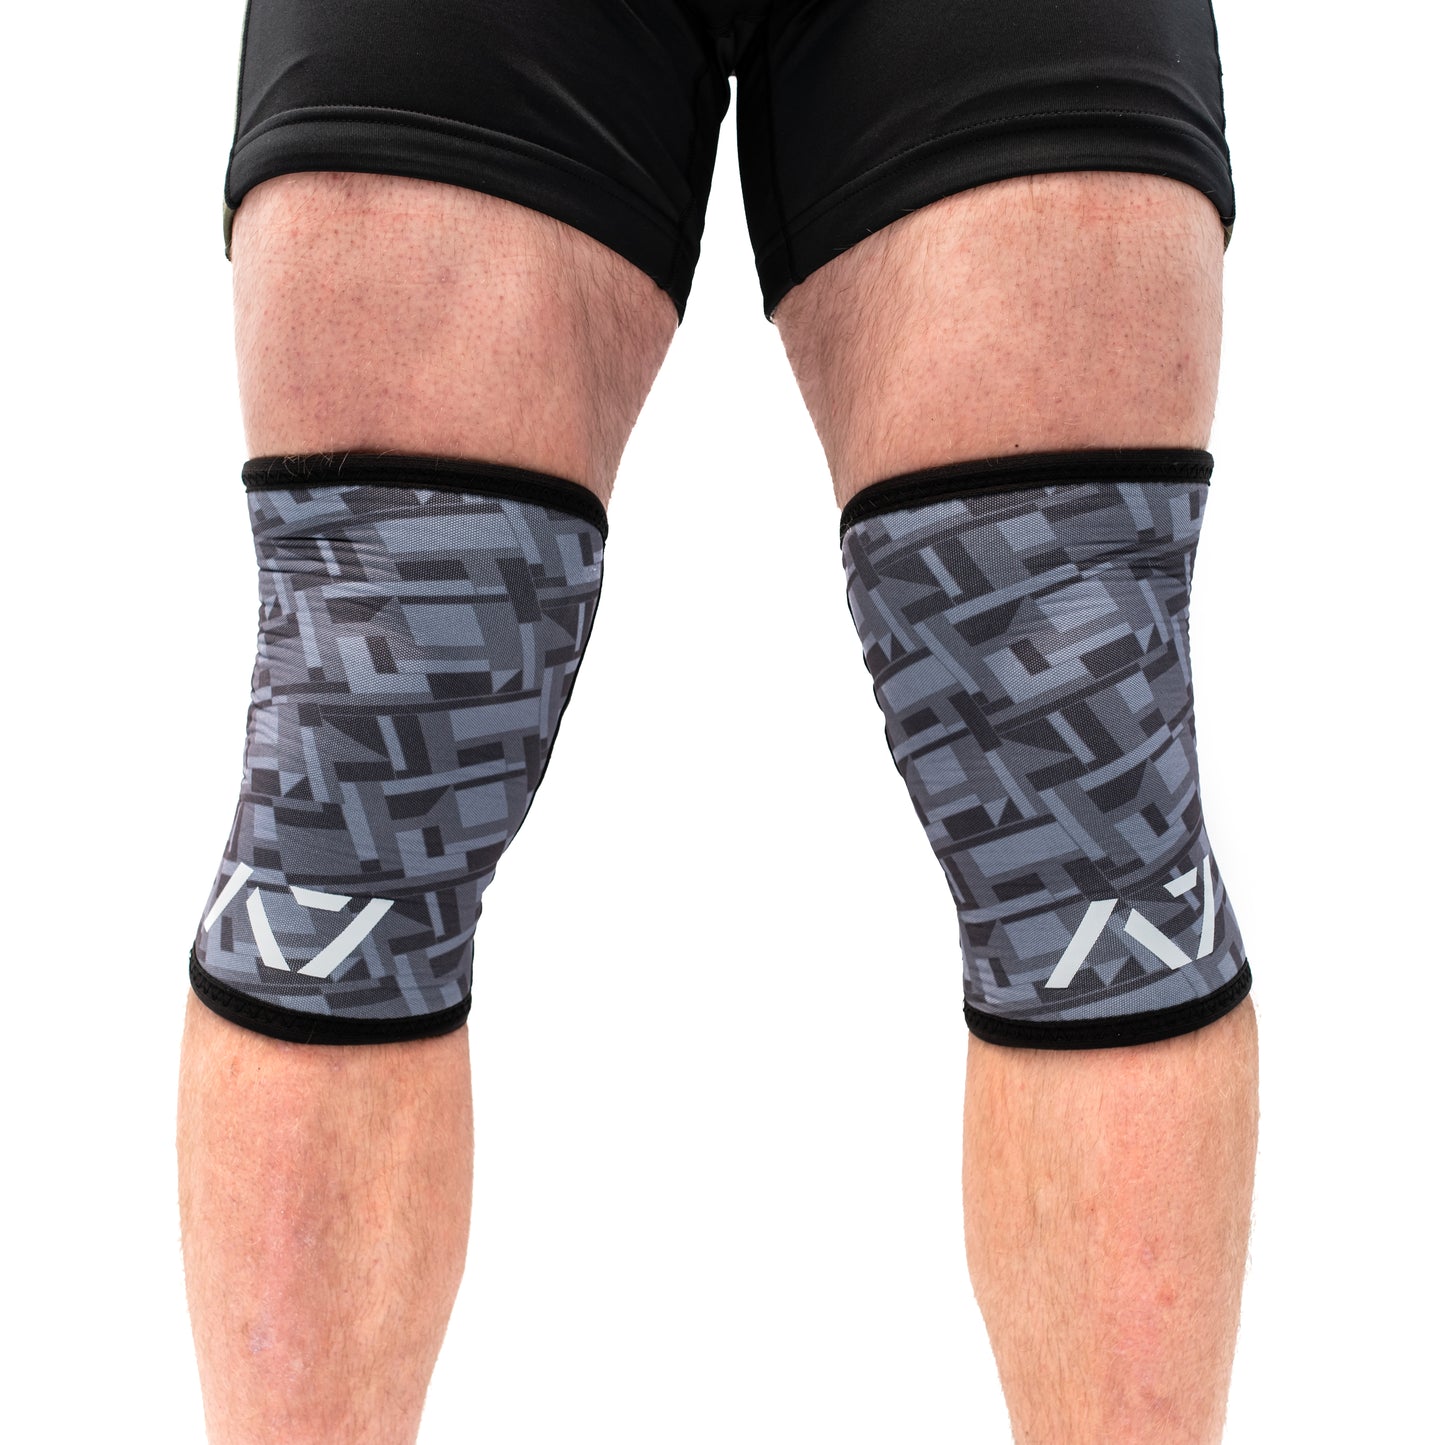 CONE Pink Knee Compression Sleeves - USPA & IPF Approved – A7